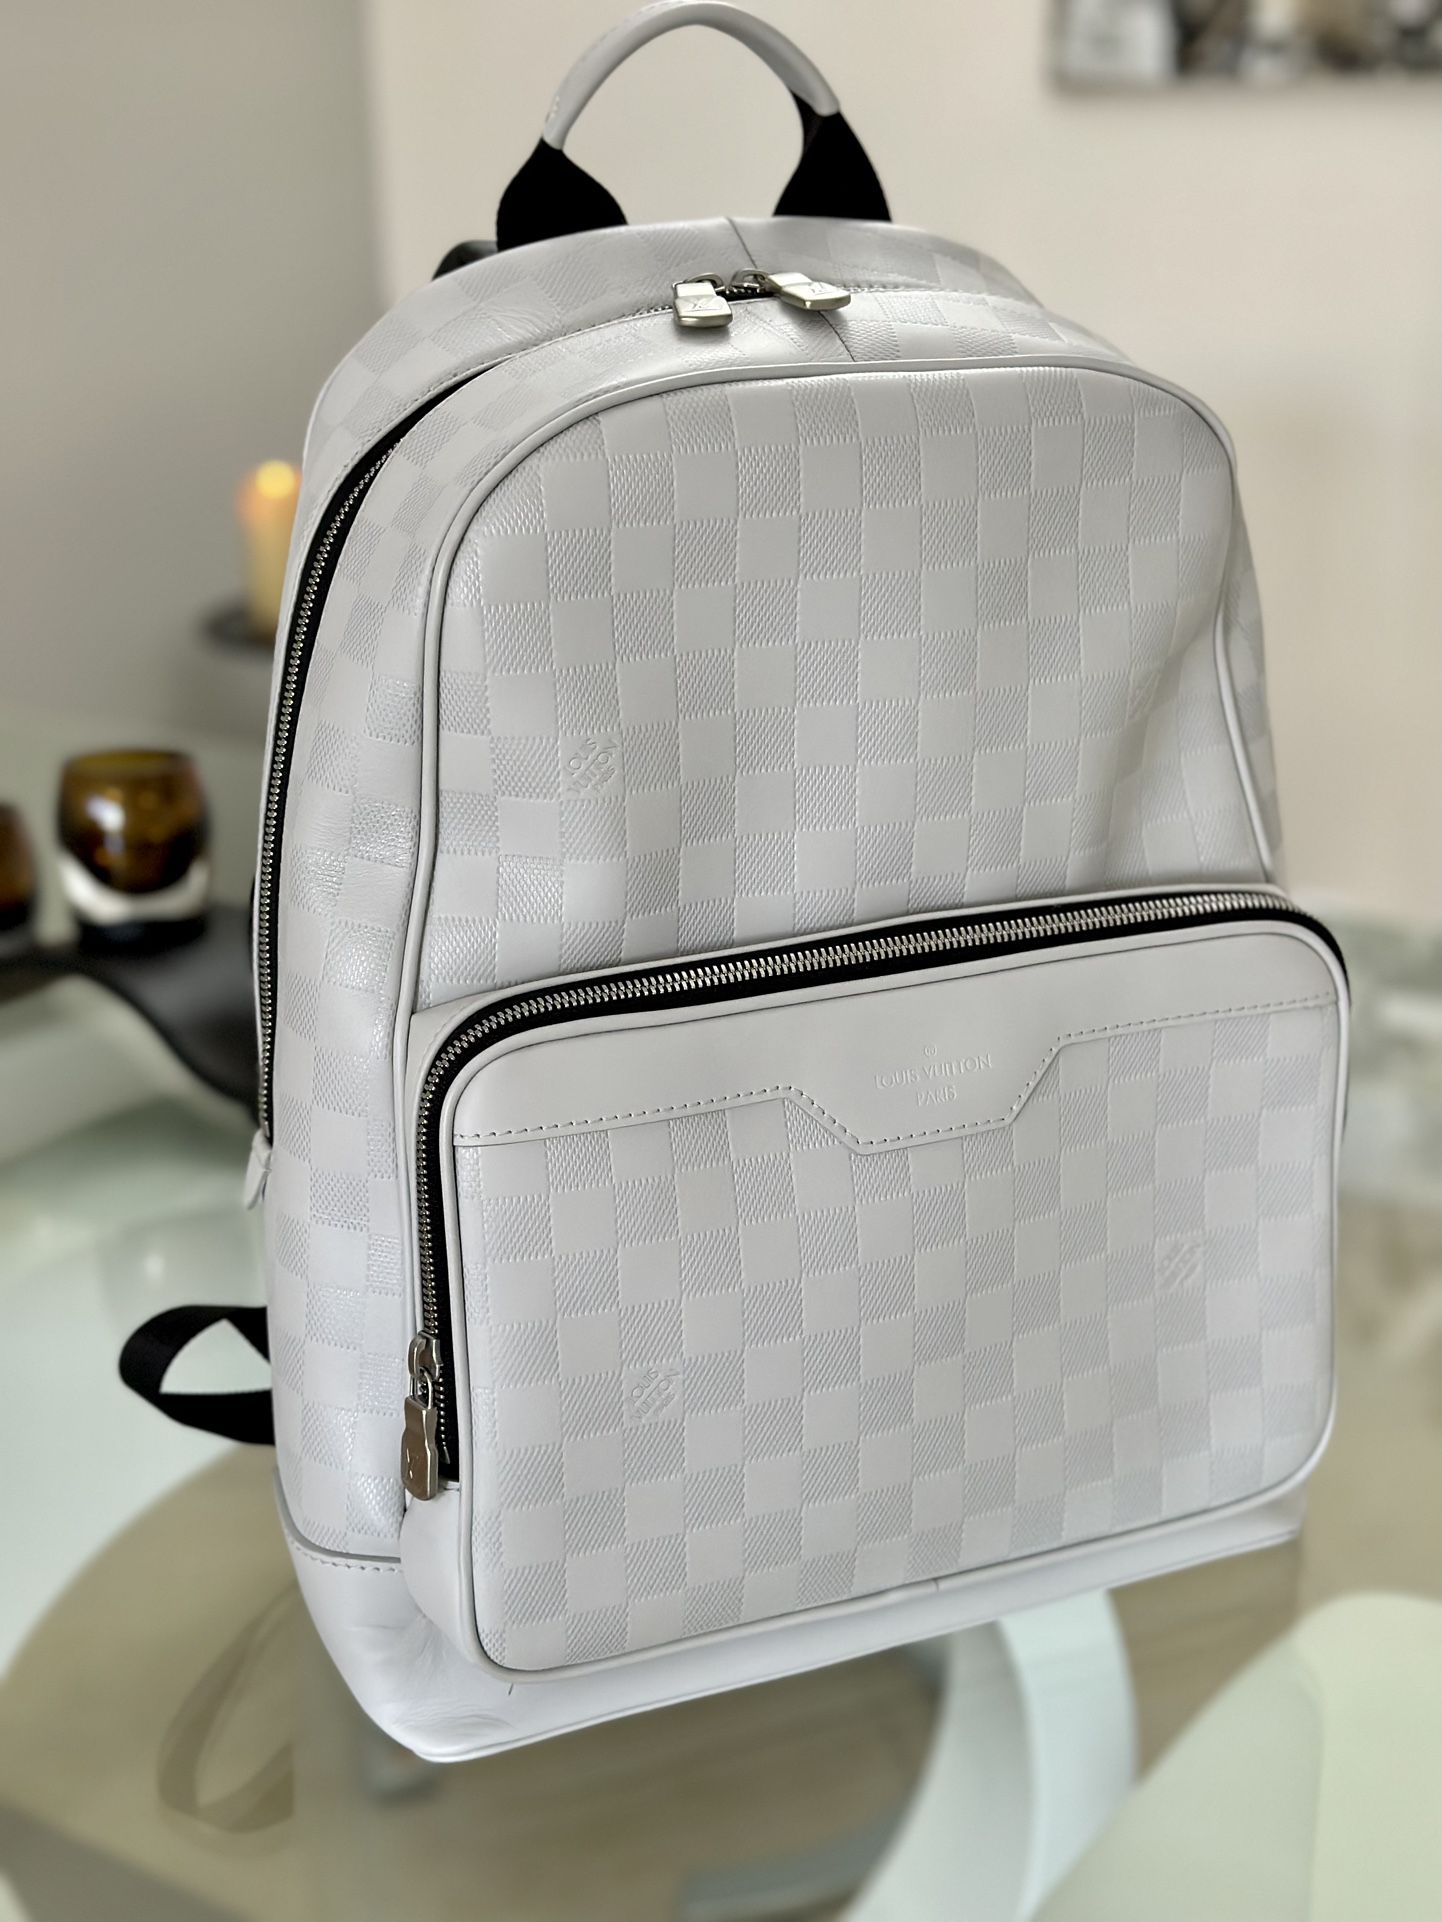 Louis Vuitton Backpack White - 11 For Sale on 1stDibs  louis vuitton  backpack cooler, lv backpack white, white louis vuitton backpack